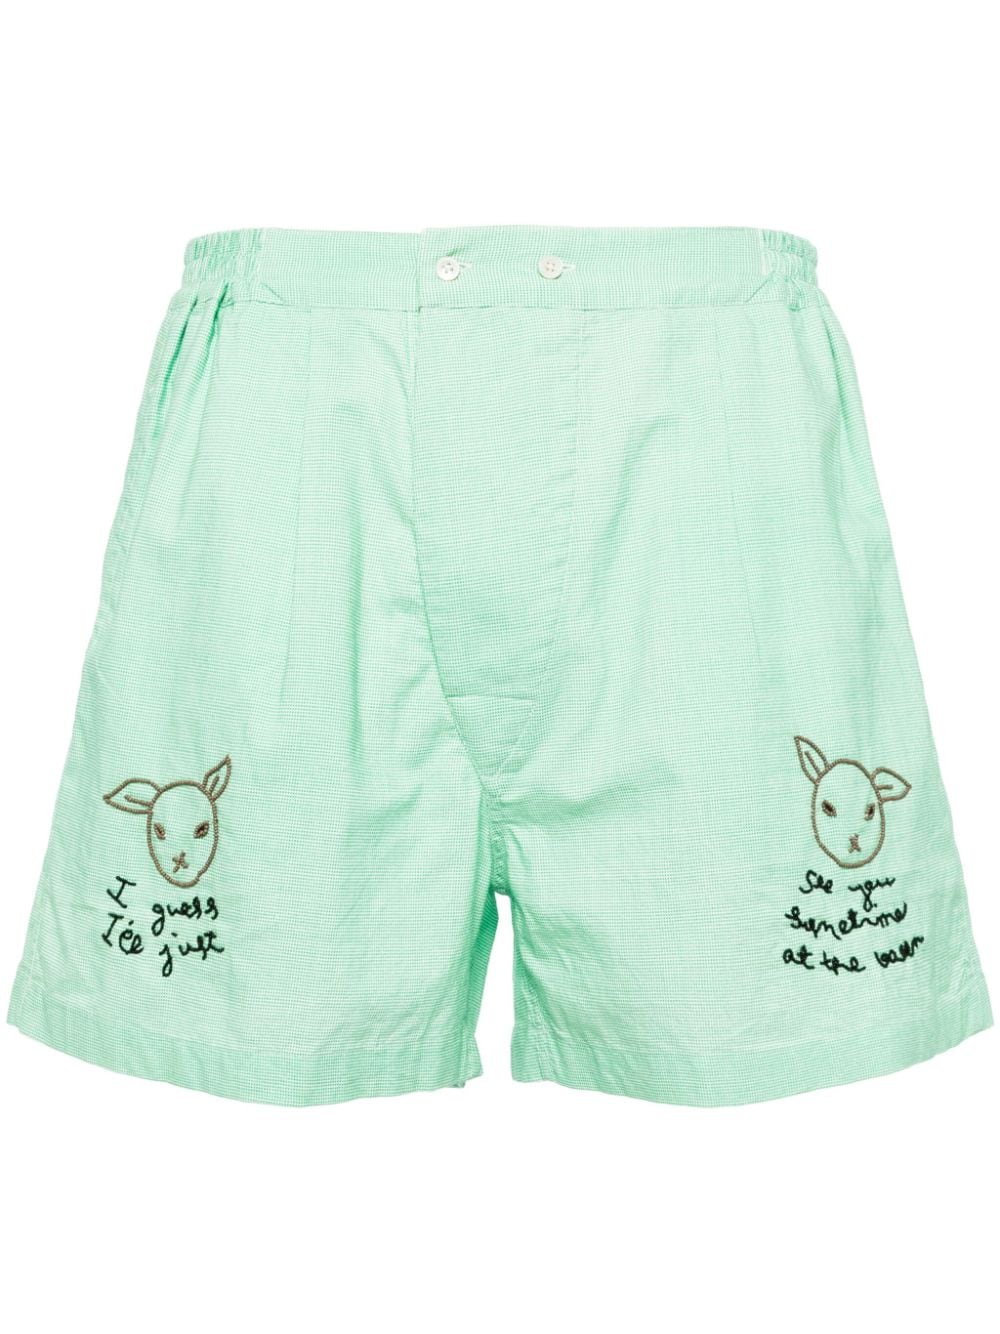 BODE See You At The Barn cotton shorts - Green